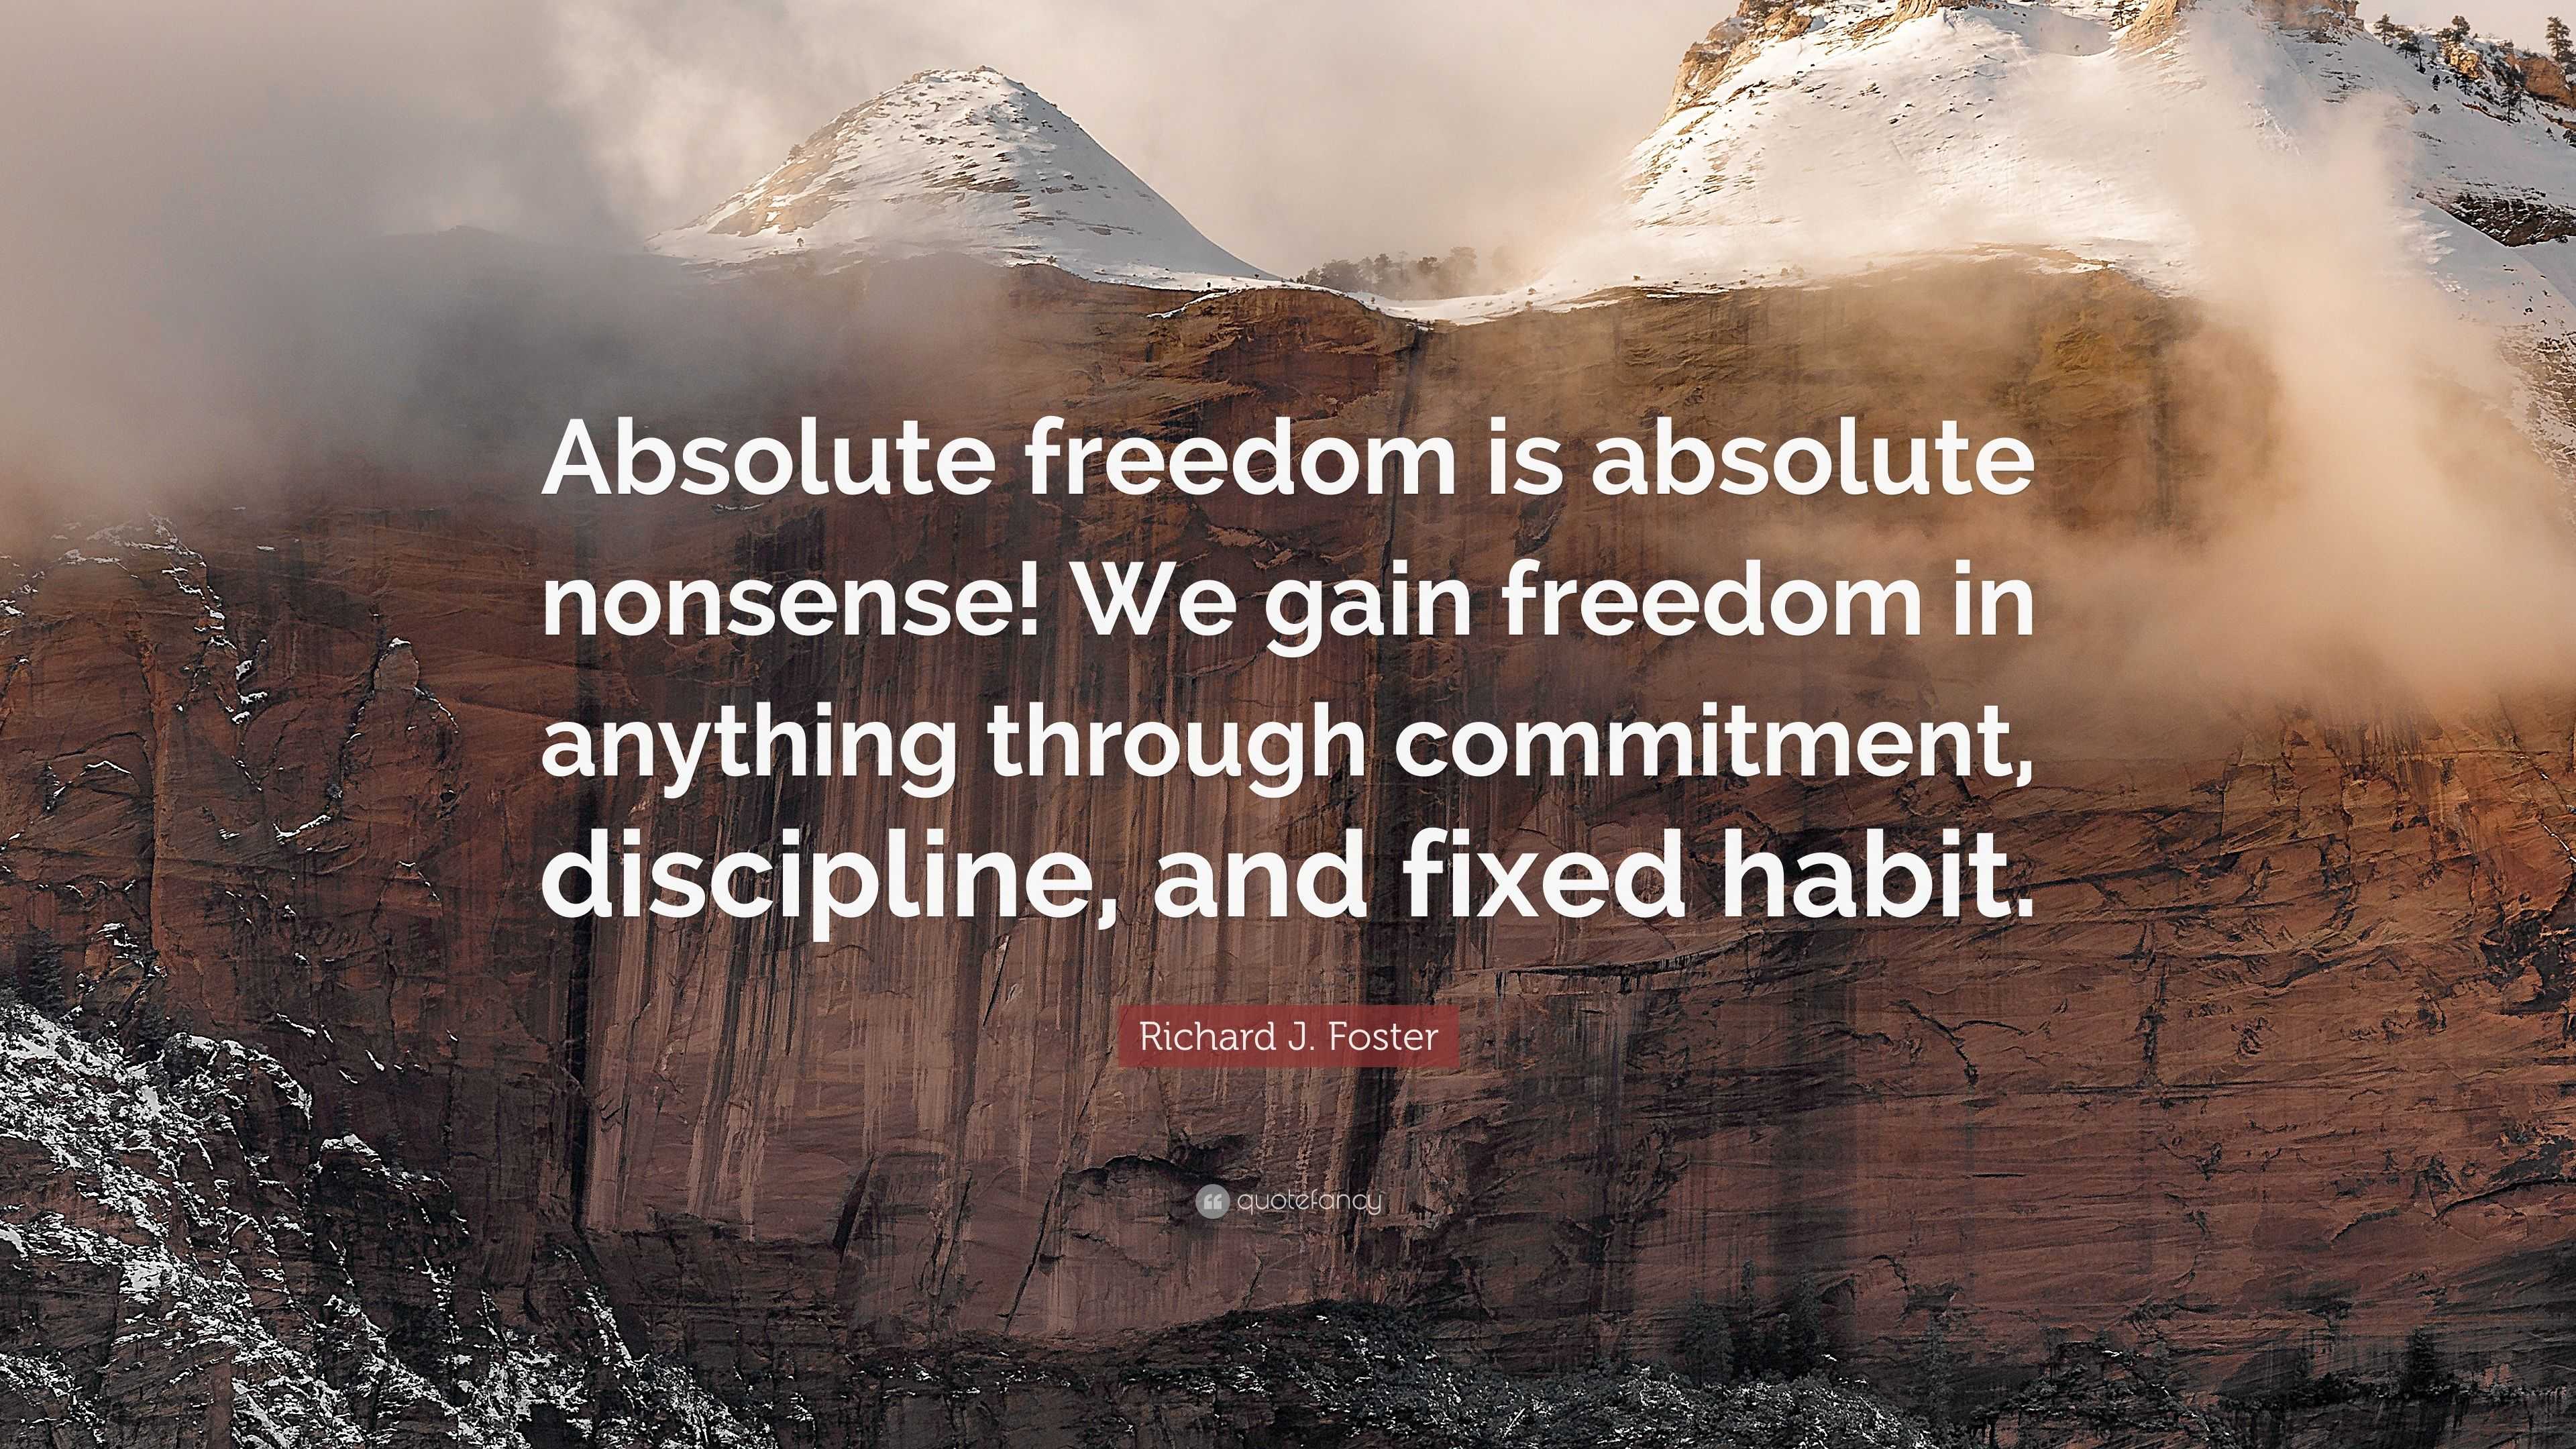 Richard J. Foster Quote: “Absolute freedom is absolute nonsense! We gain  freedom in anything through commitment